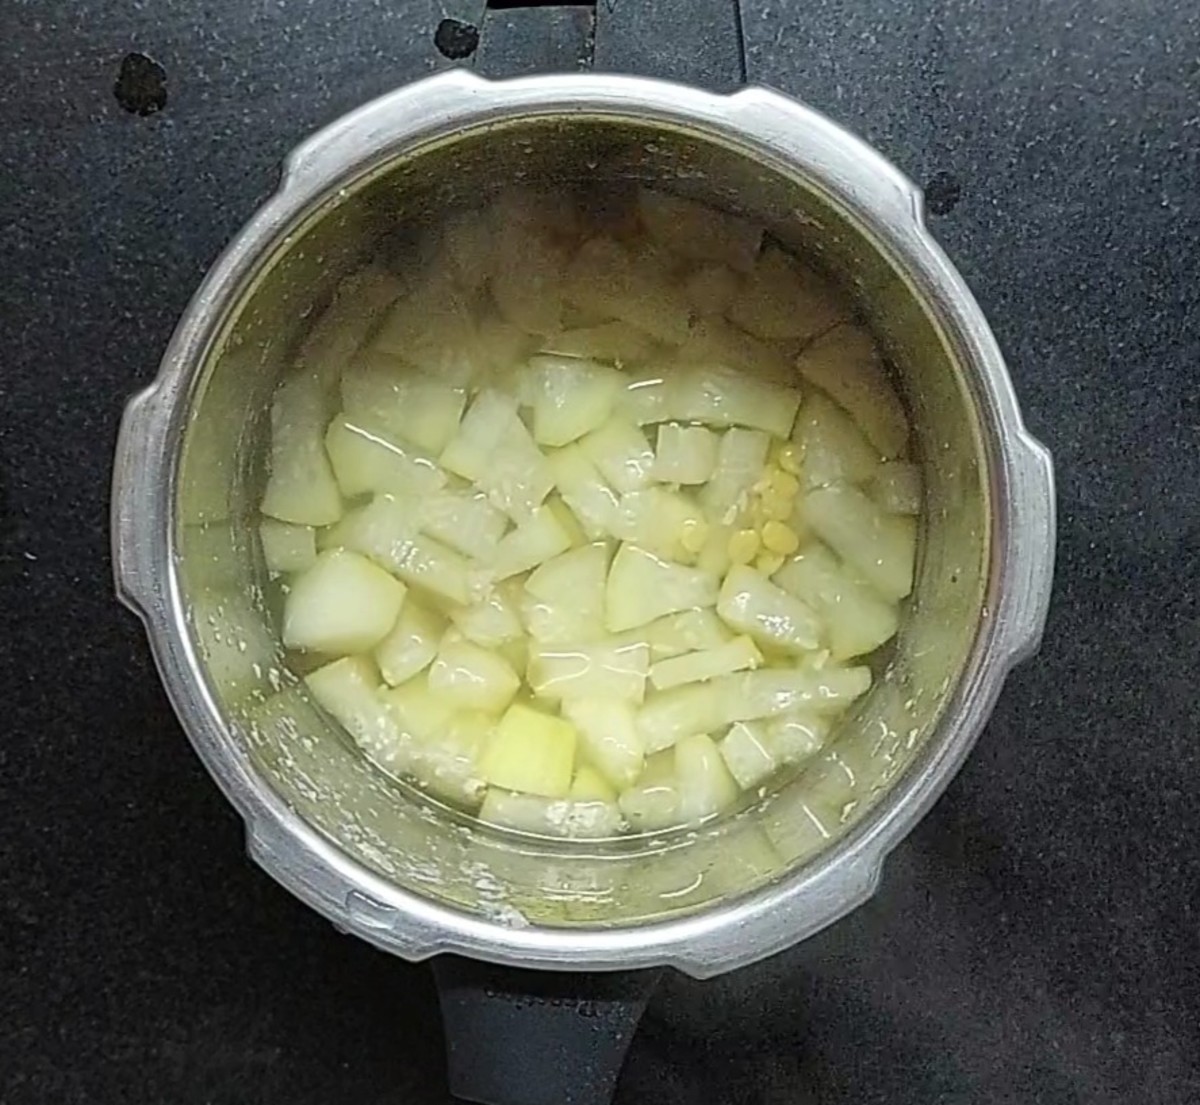 Once pressure of the cooker releases, open and check if dal and bottle gourd cooked properly.